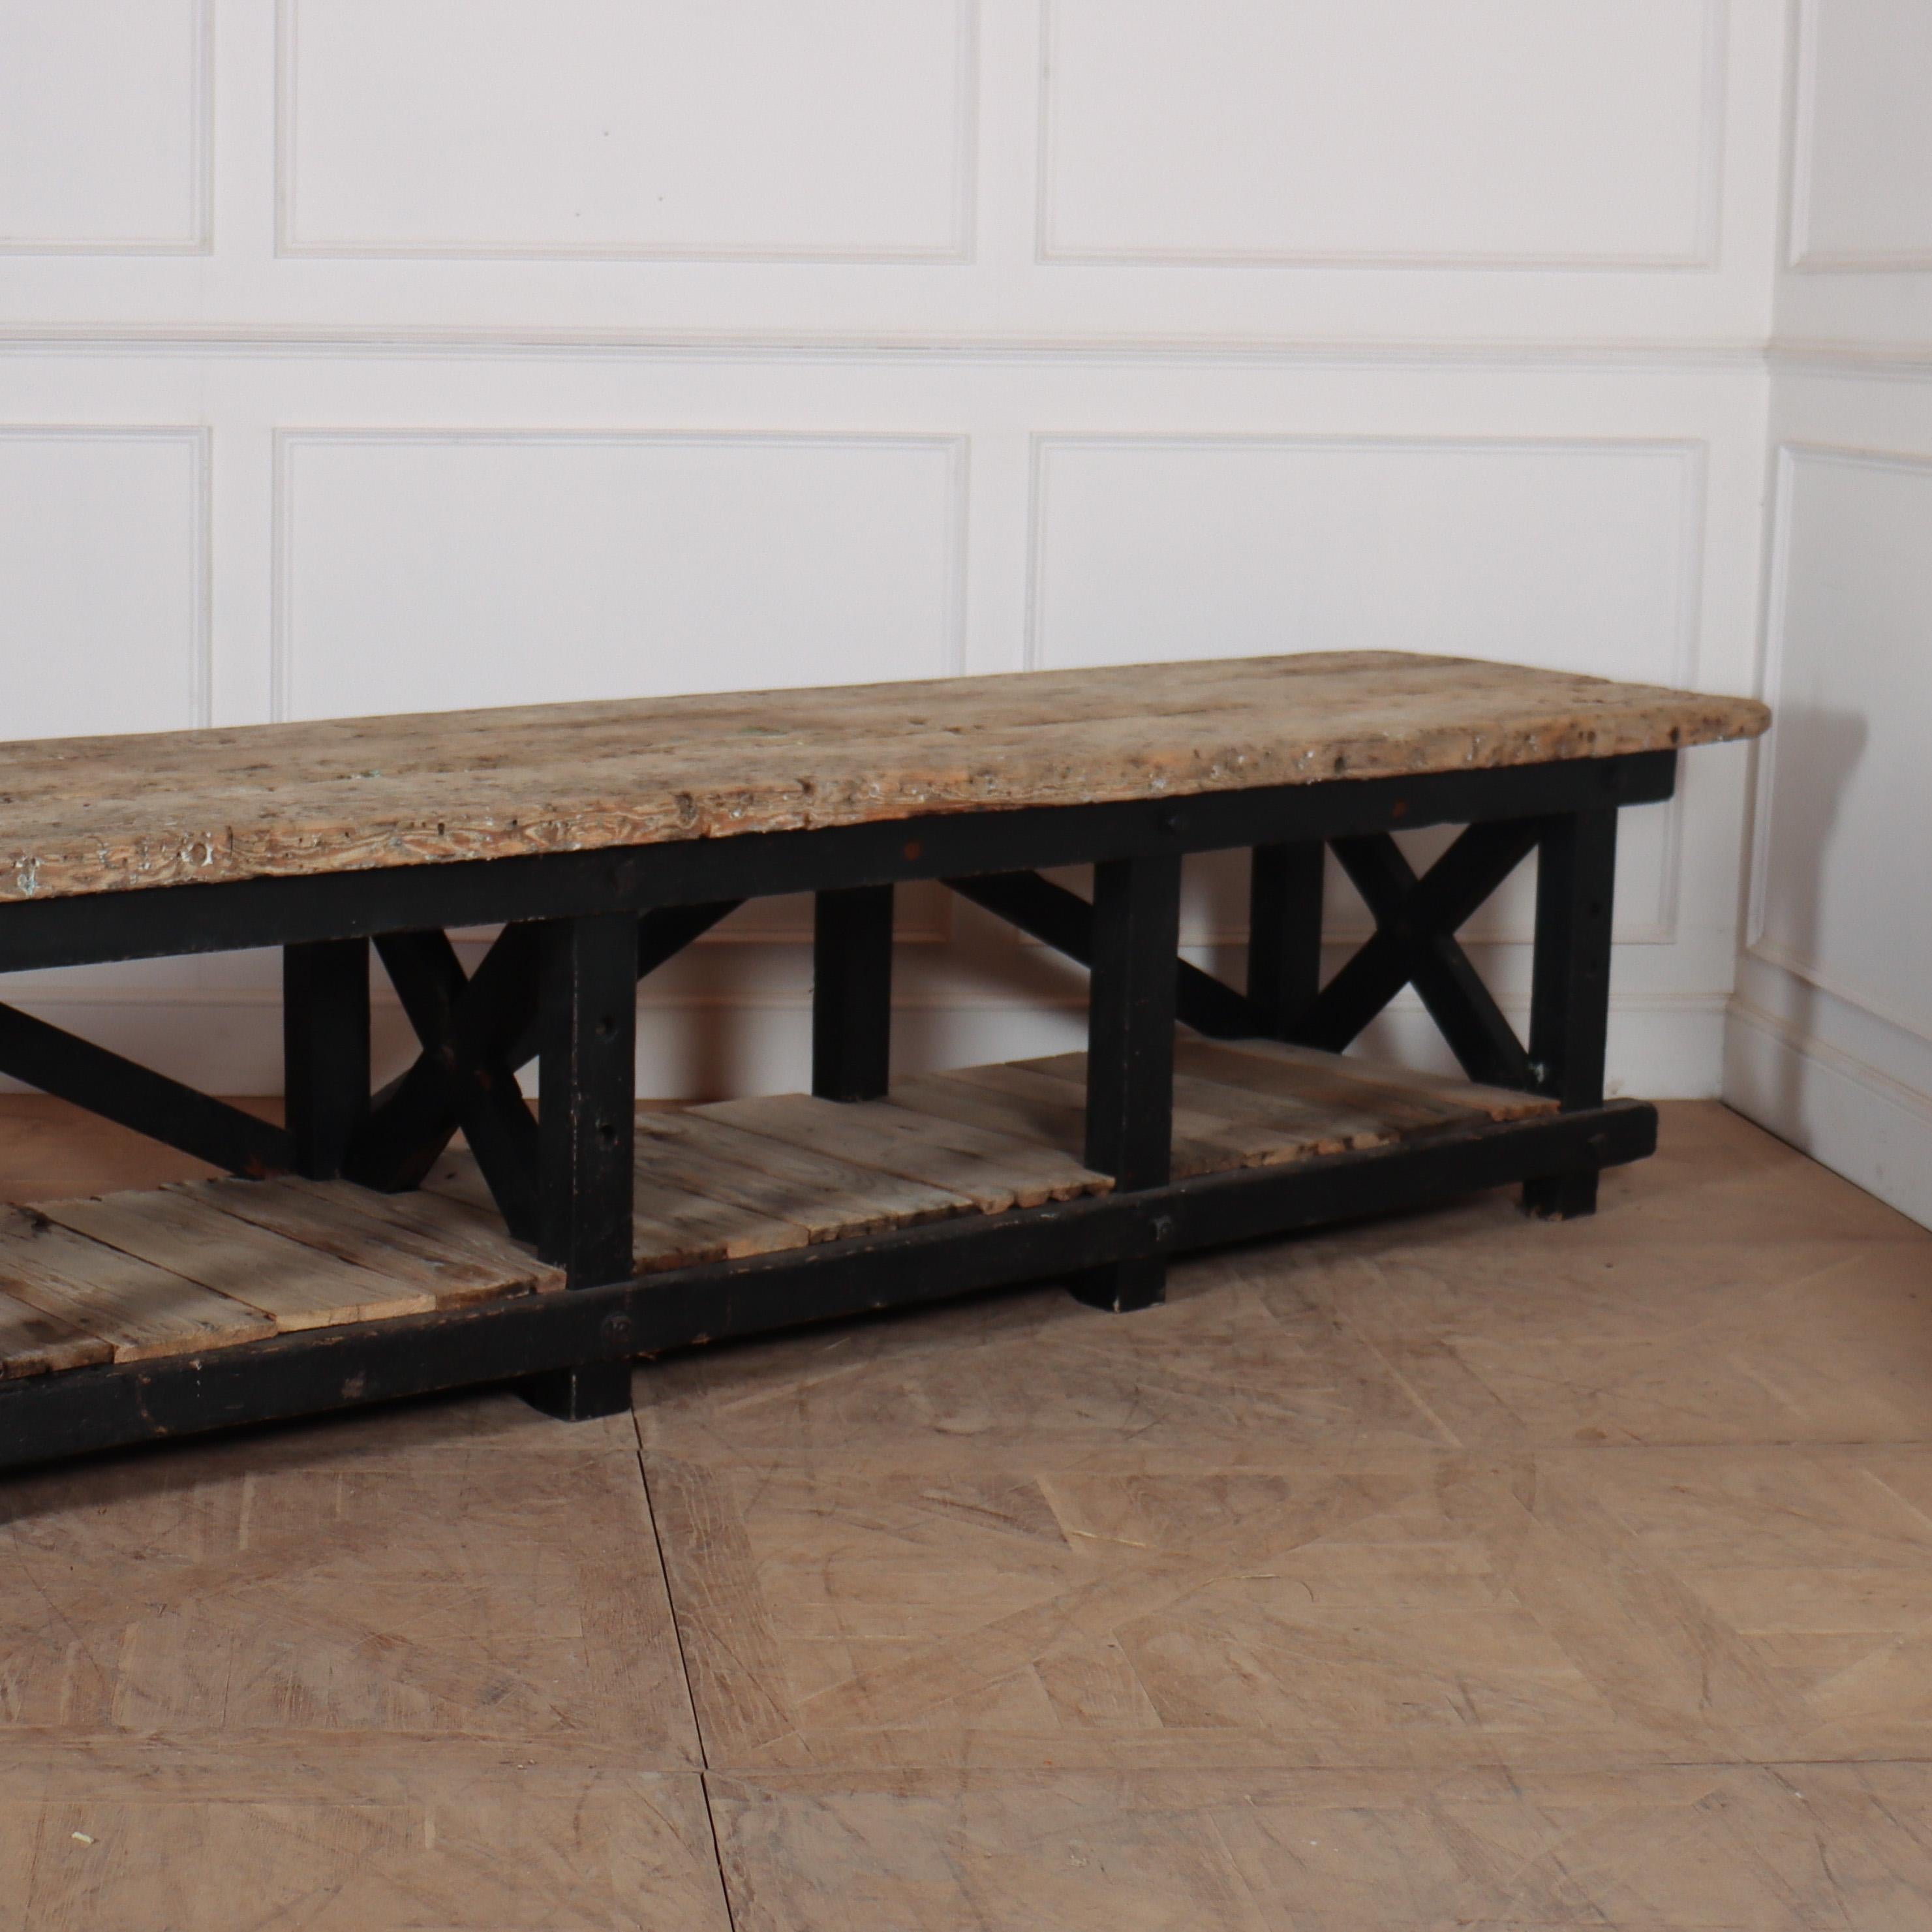 Monumental 19th C pine display table. Originally a work table from an armoury. 1860

Reference: 7945

Dimensions
150.5 inches (382 cms) Wide
29 inches (74 cms) Deep
38.5 inches (98 cms) High